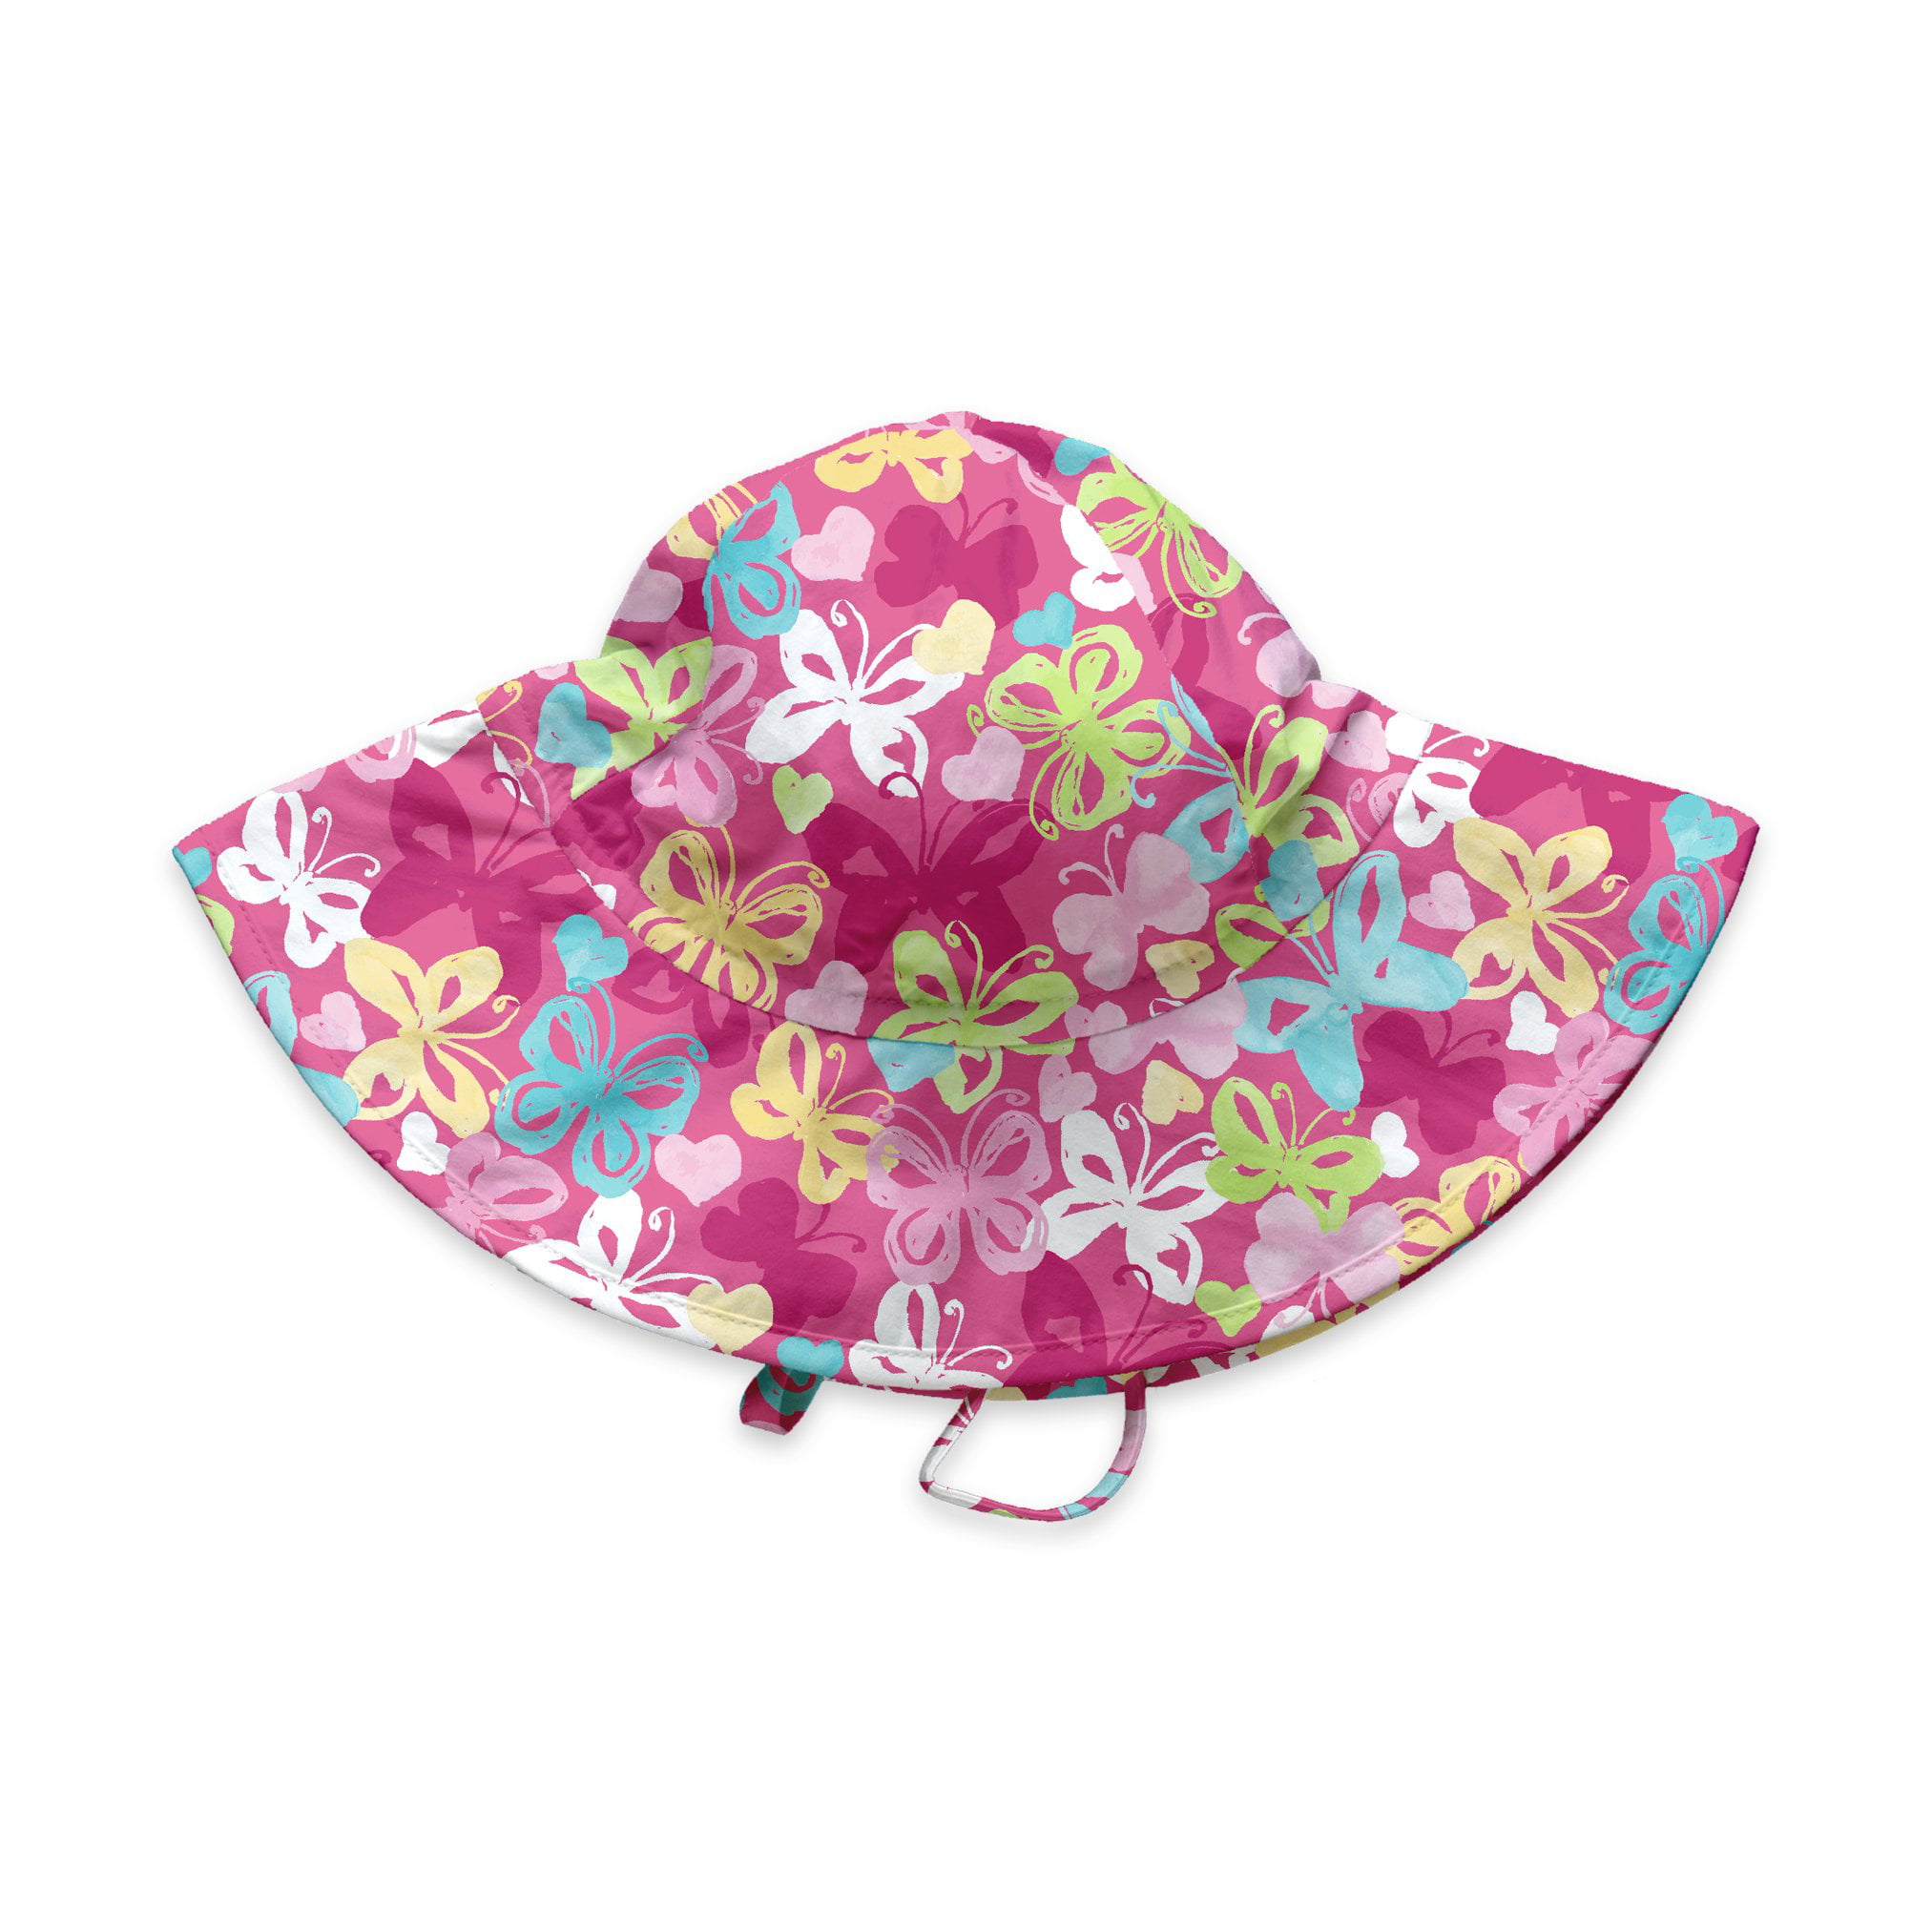 i play. by green sprouts Bucket Sun Protection Hat UPF 50+ Sun Protection  White